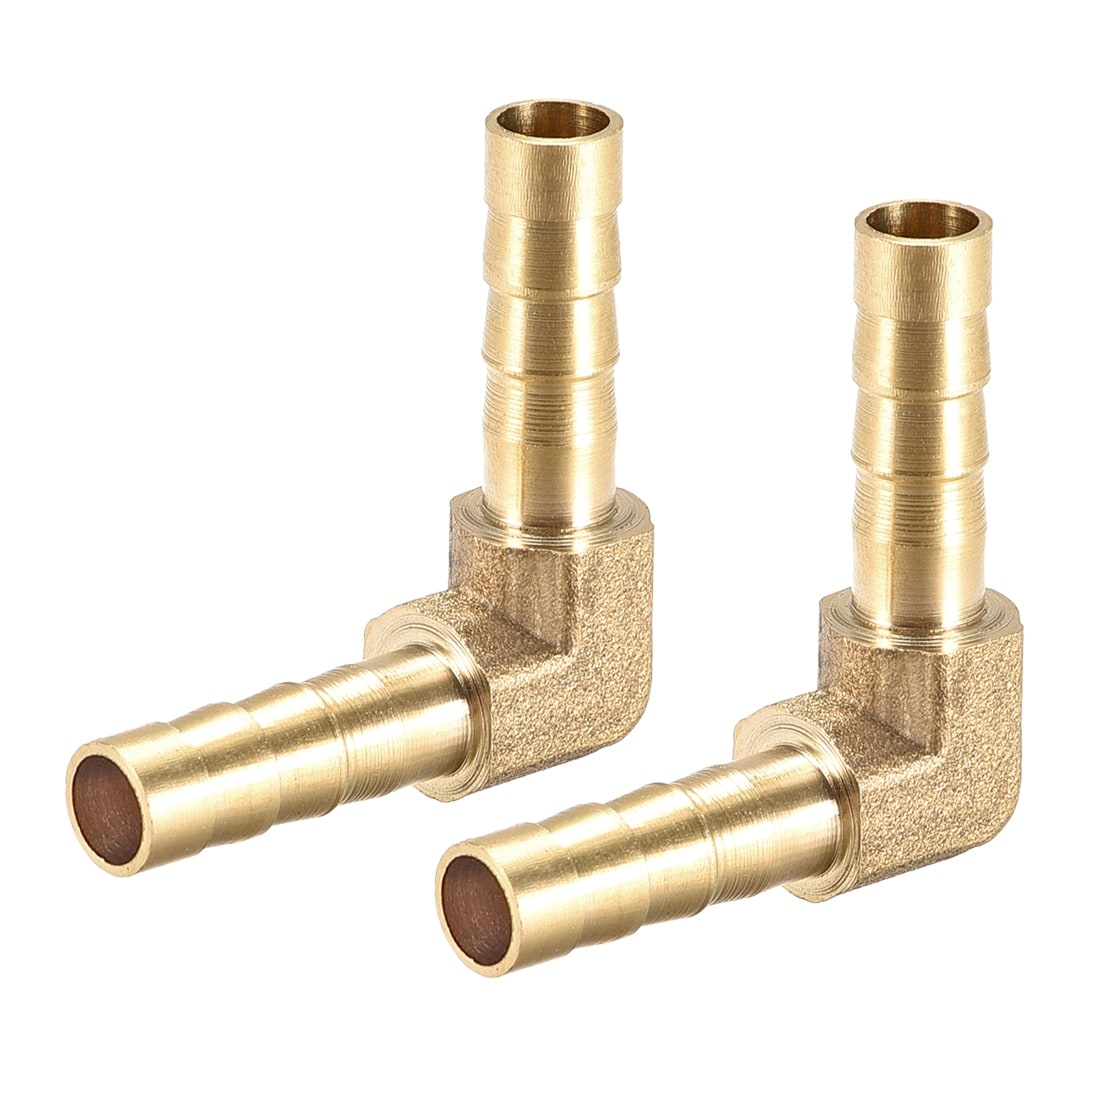 6mm Brass Barbed 90 Degree Elbow Fuel Gas Air Water Hose Joiner Adapter Fitting 